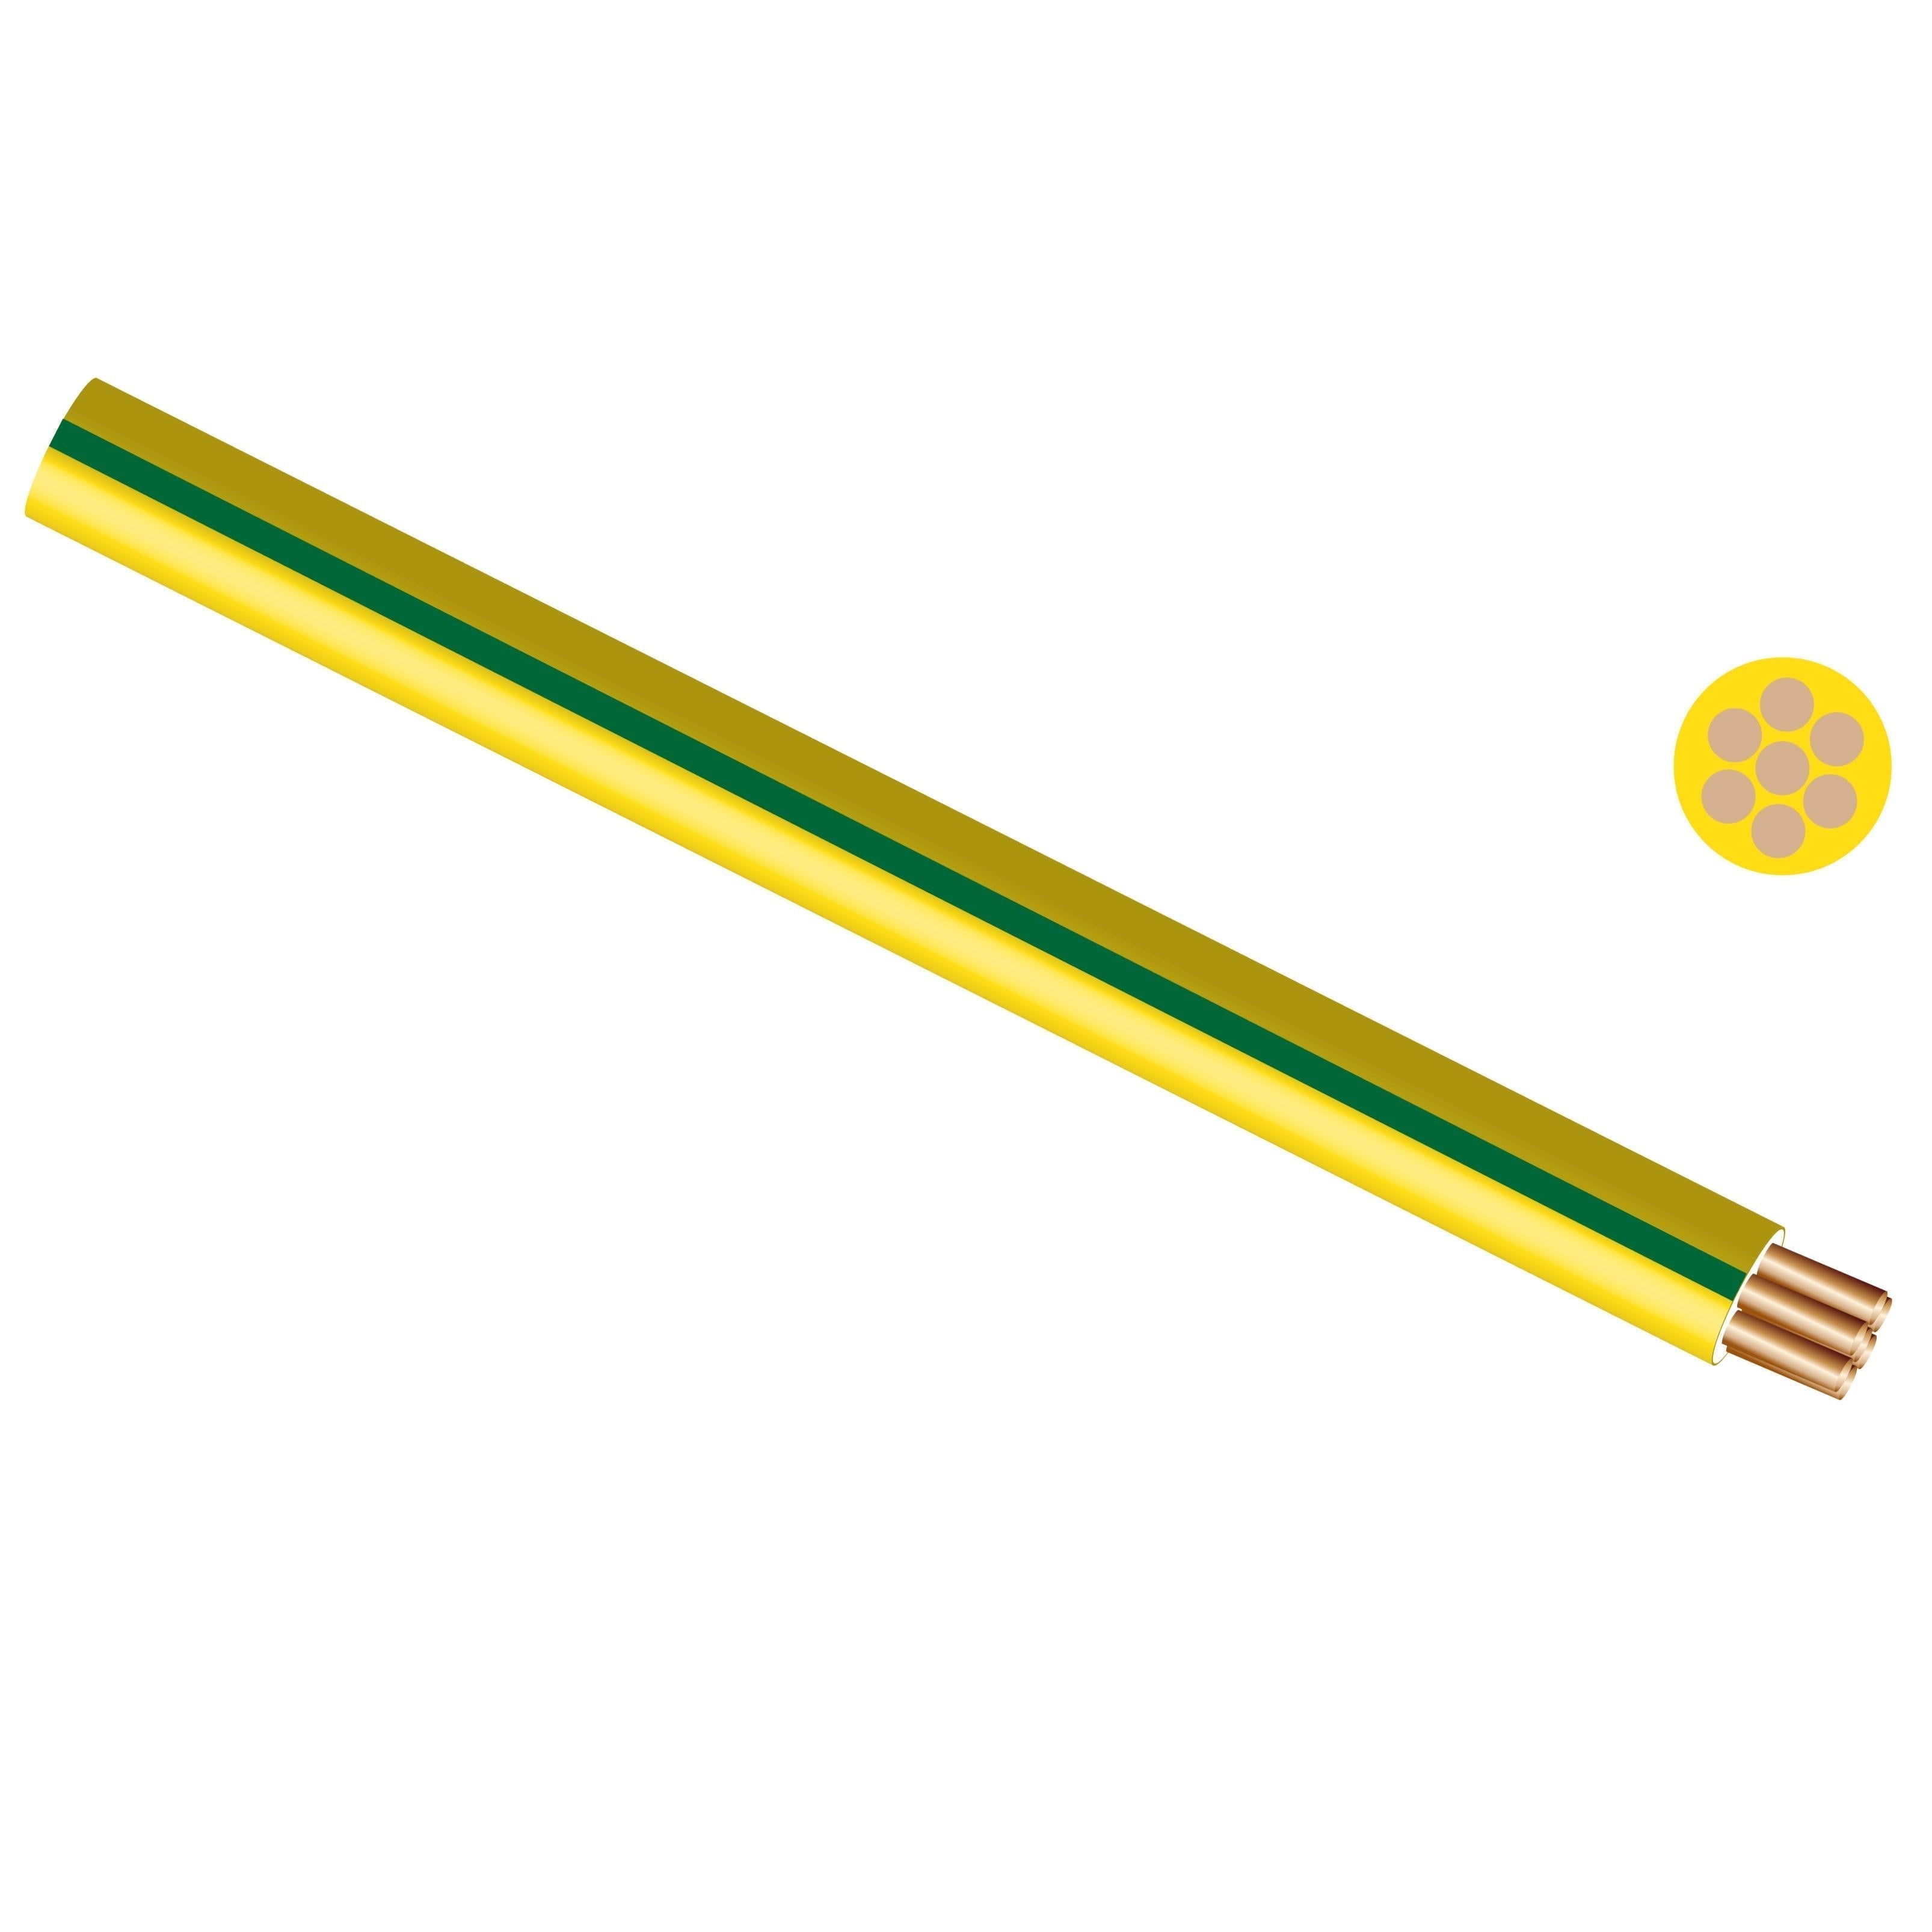 Cable GP House Wire 𝑝/𝑚eter »-Electrical-Private Label Electrical-1.5𝑚𝑚²-Green-diyshop.co.za